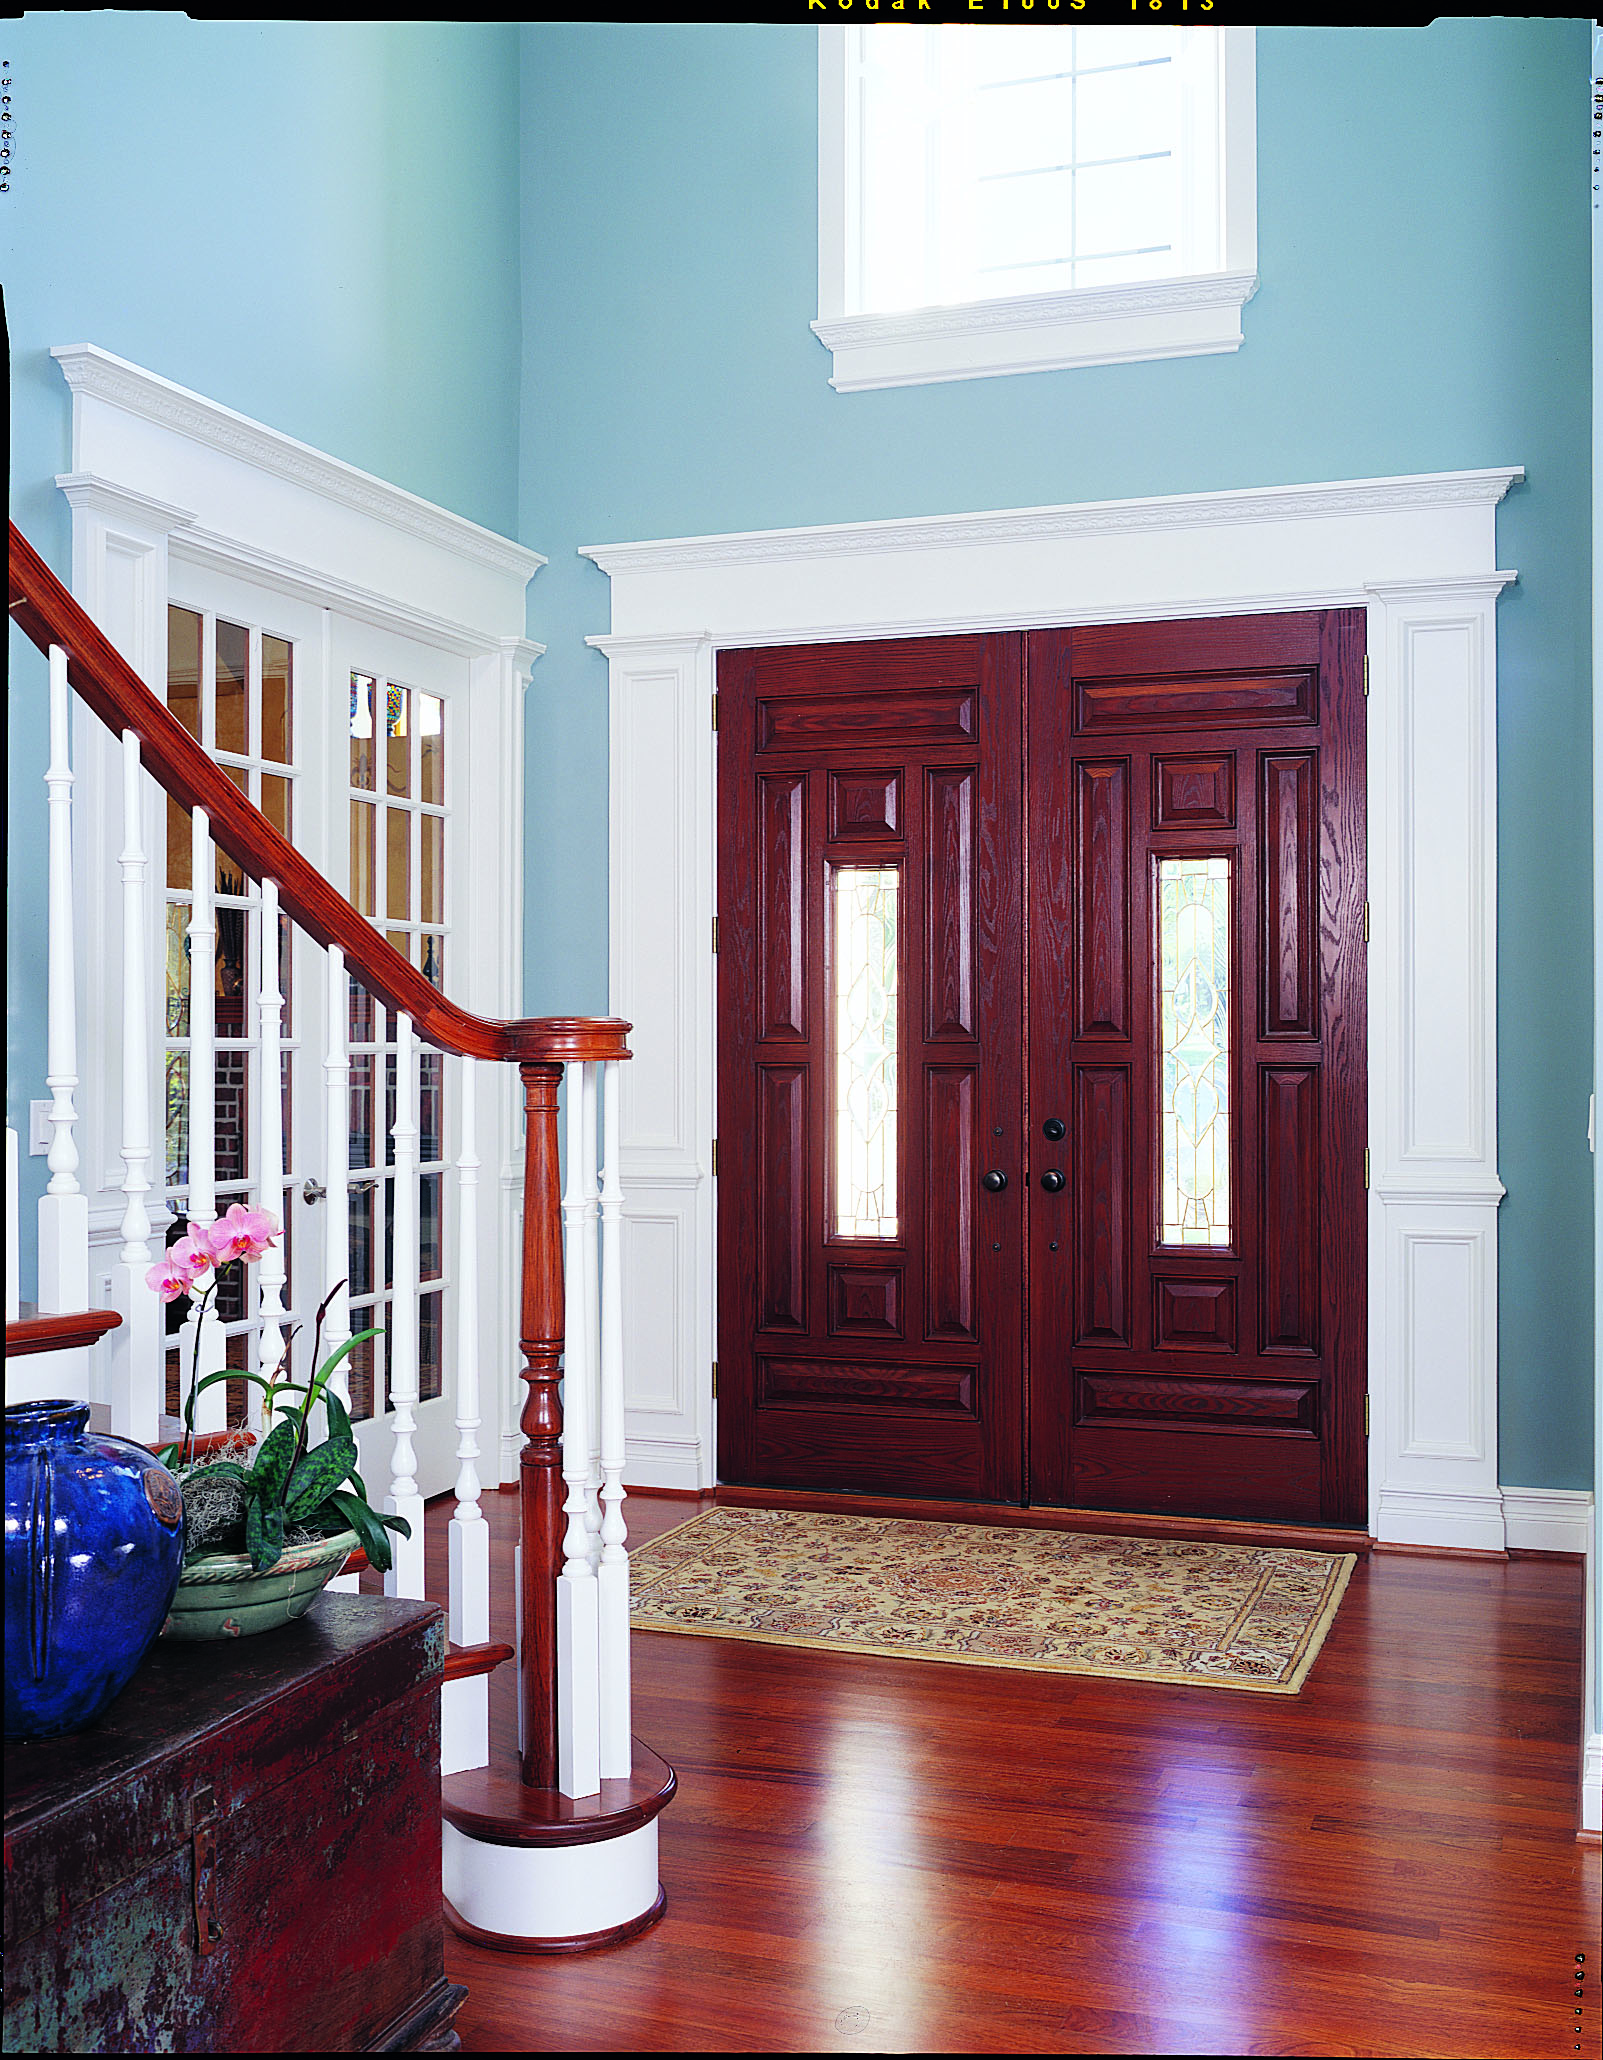 Update Your Home's Curb Appeal with an Entry Door